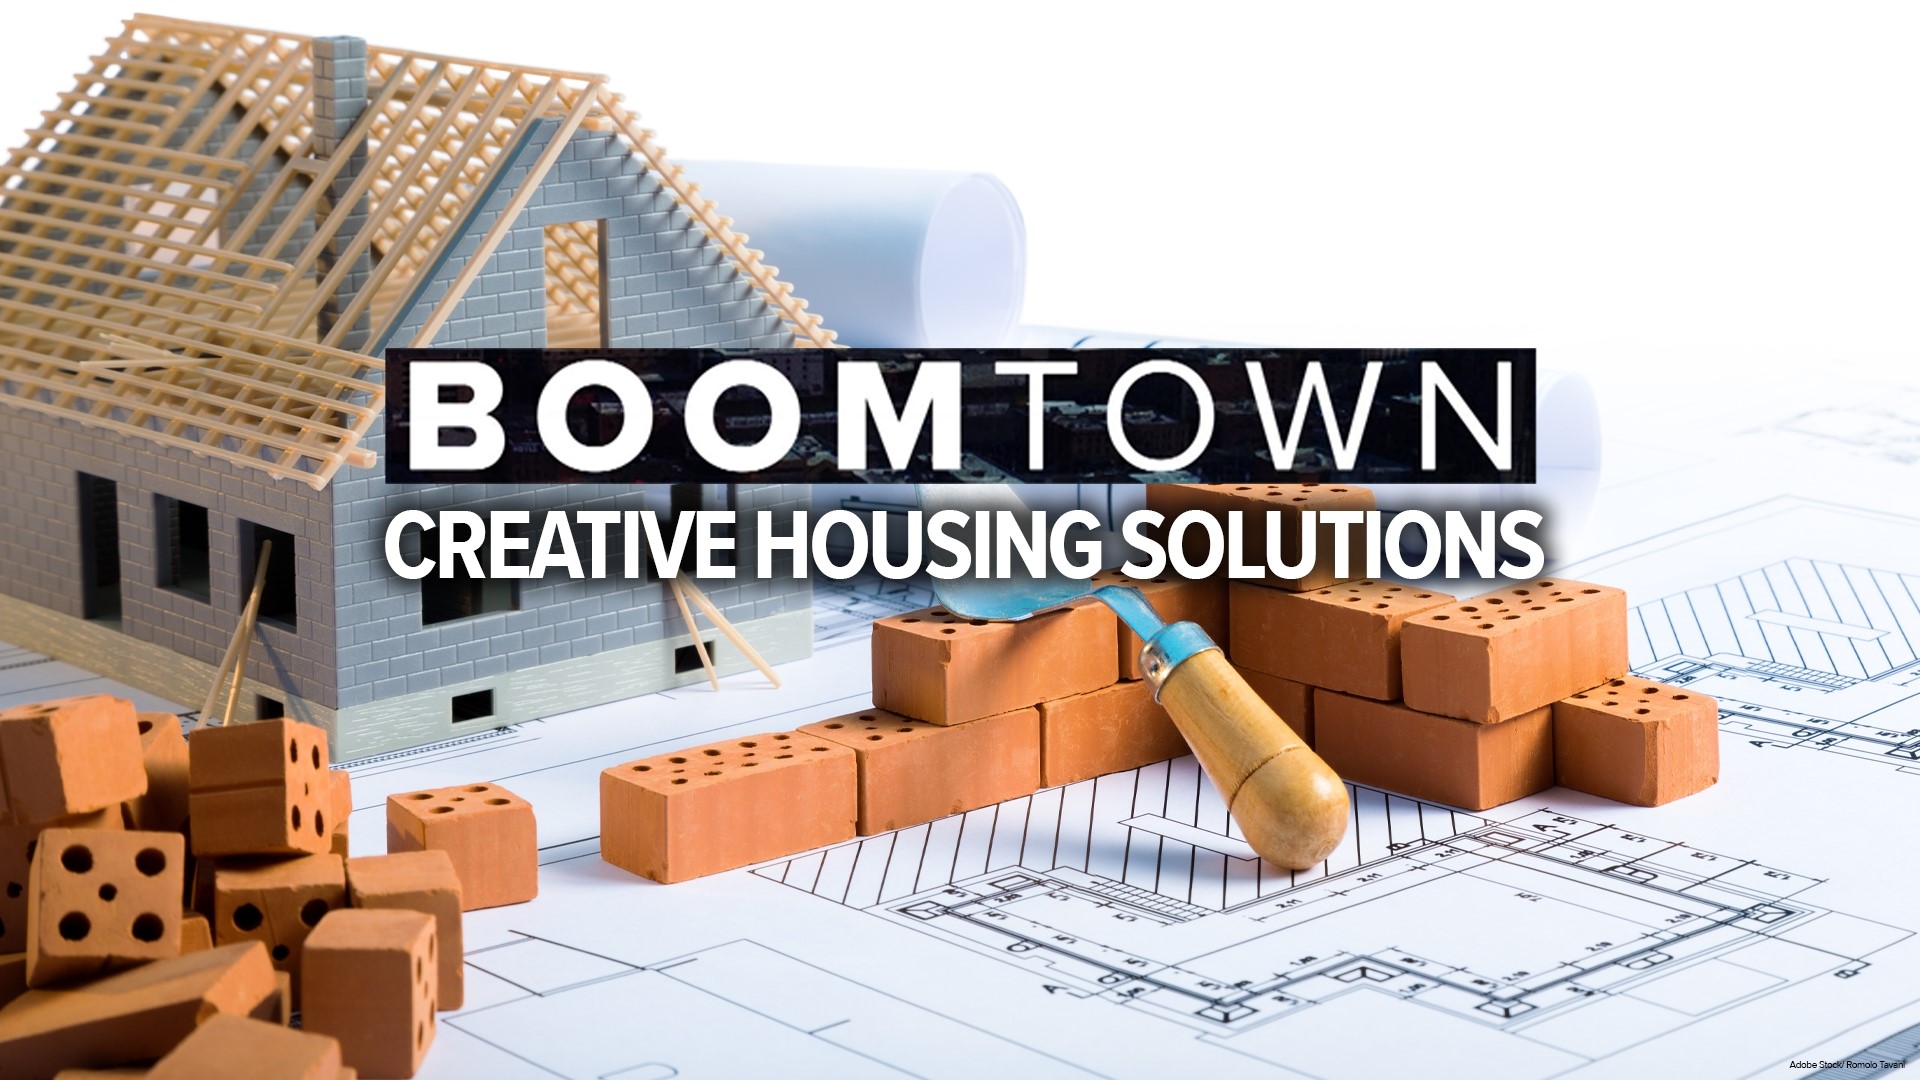 With home prices near record highs, some people are getting creative to find housing. In this Boomtown special we